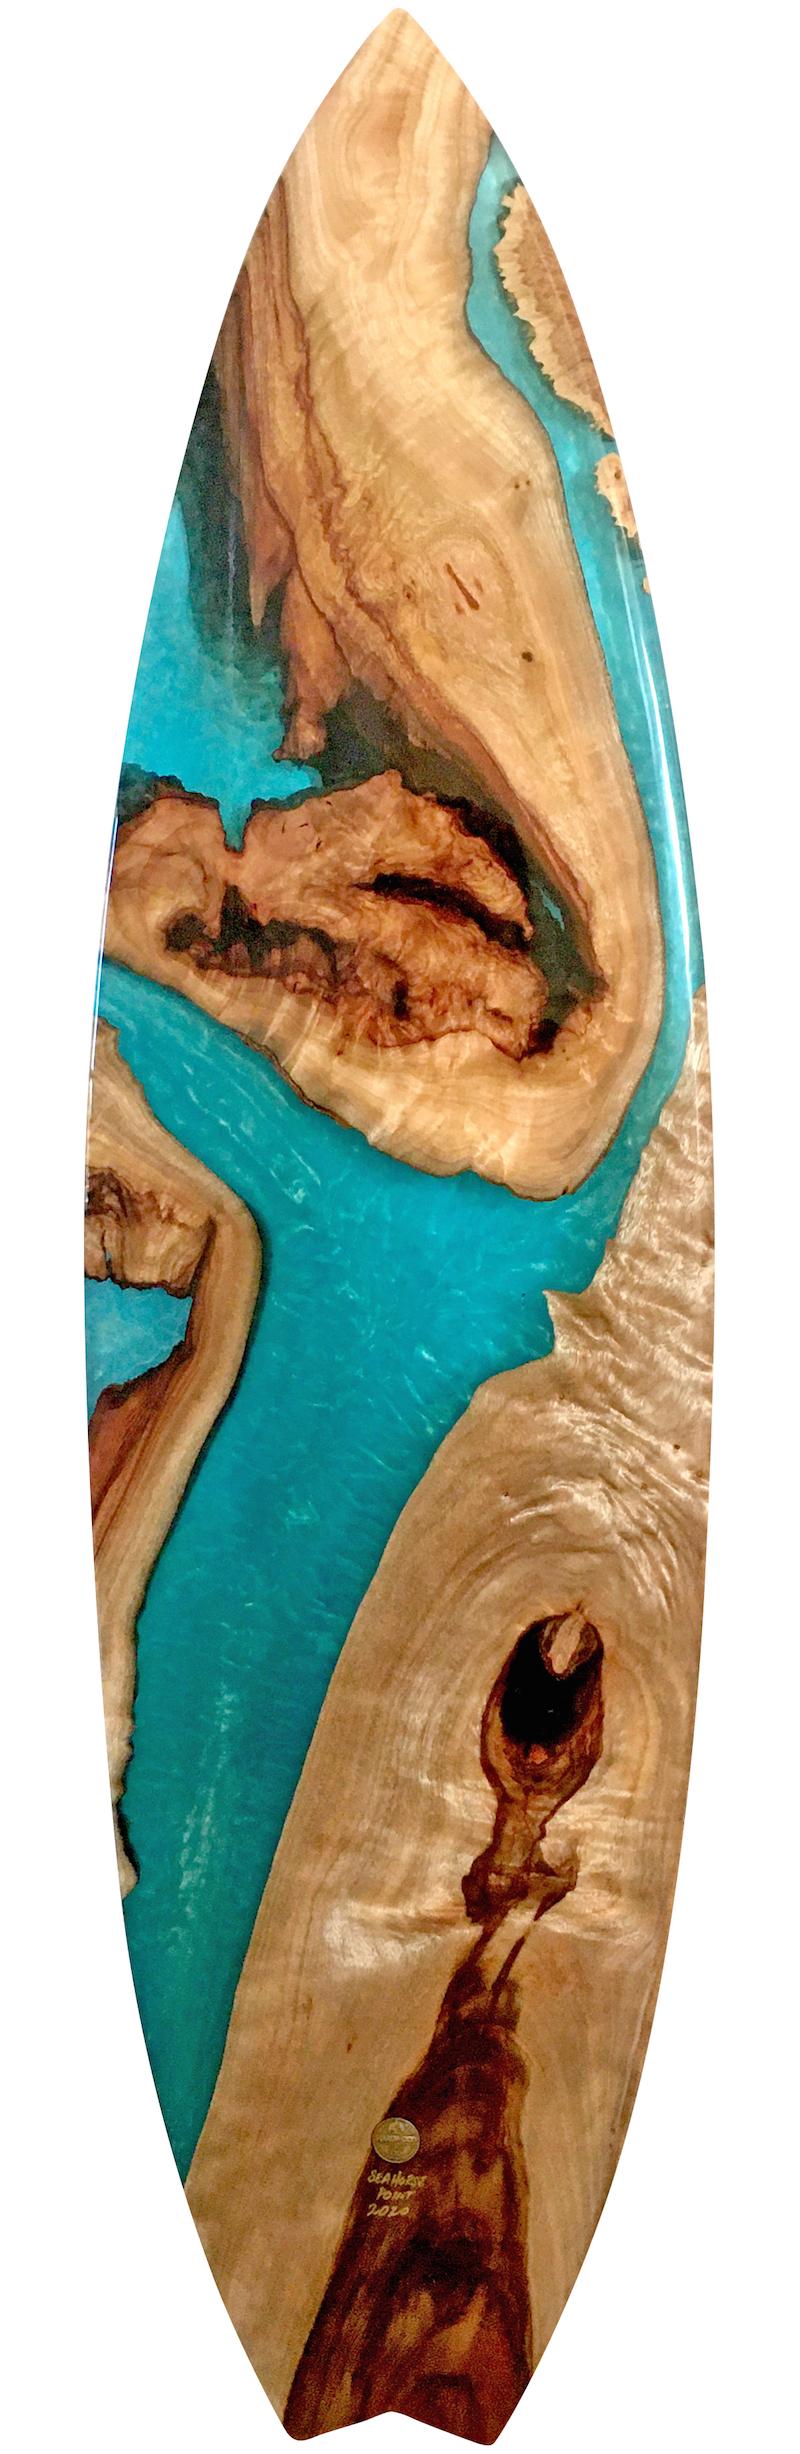 One of a kind “Seahorse Point” finless surfboard work of art by Australian artist Joshua Marks. Featuring a camphor laurel and maple natural edge wood composition fused with turquoise clear epoxy resin and blue/green pearl pigments.